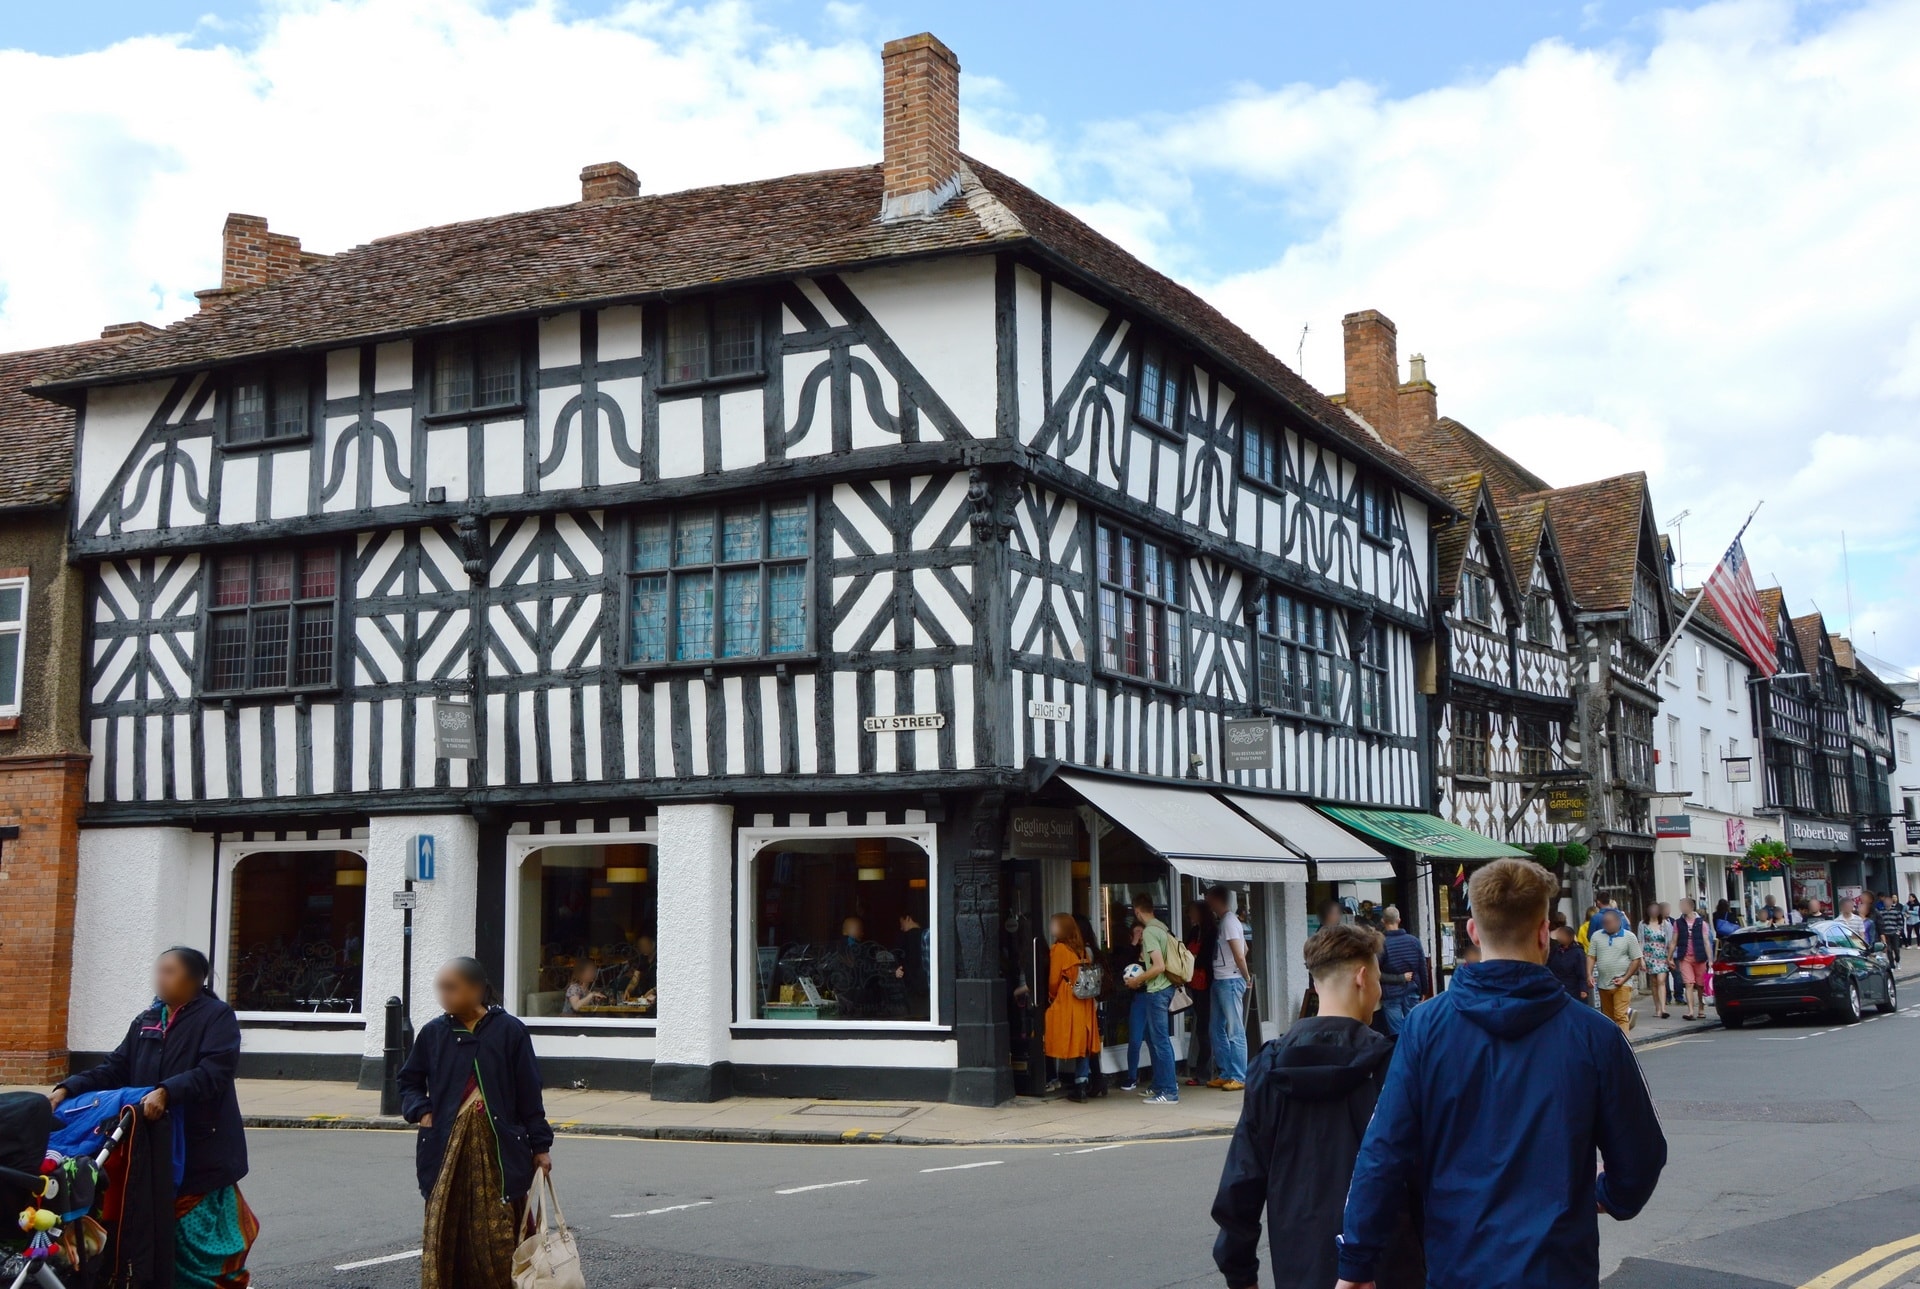 Another fine example of English half-timber work on High Street